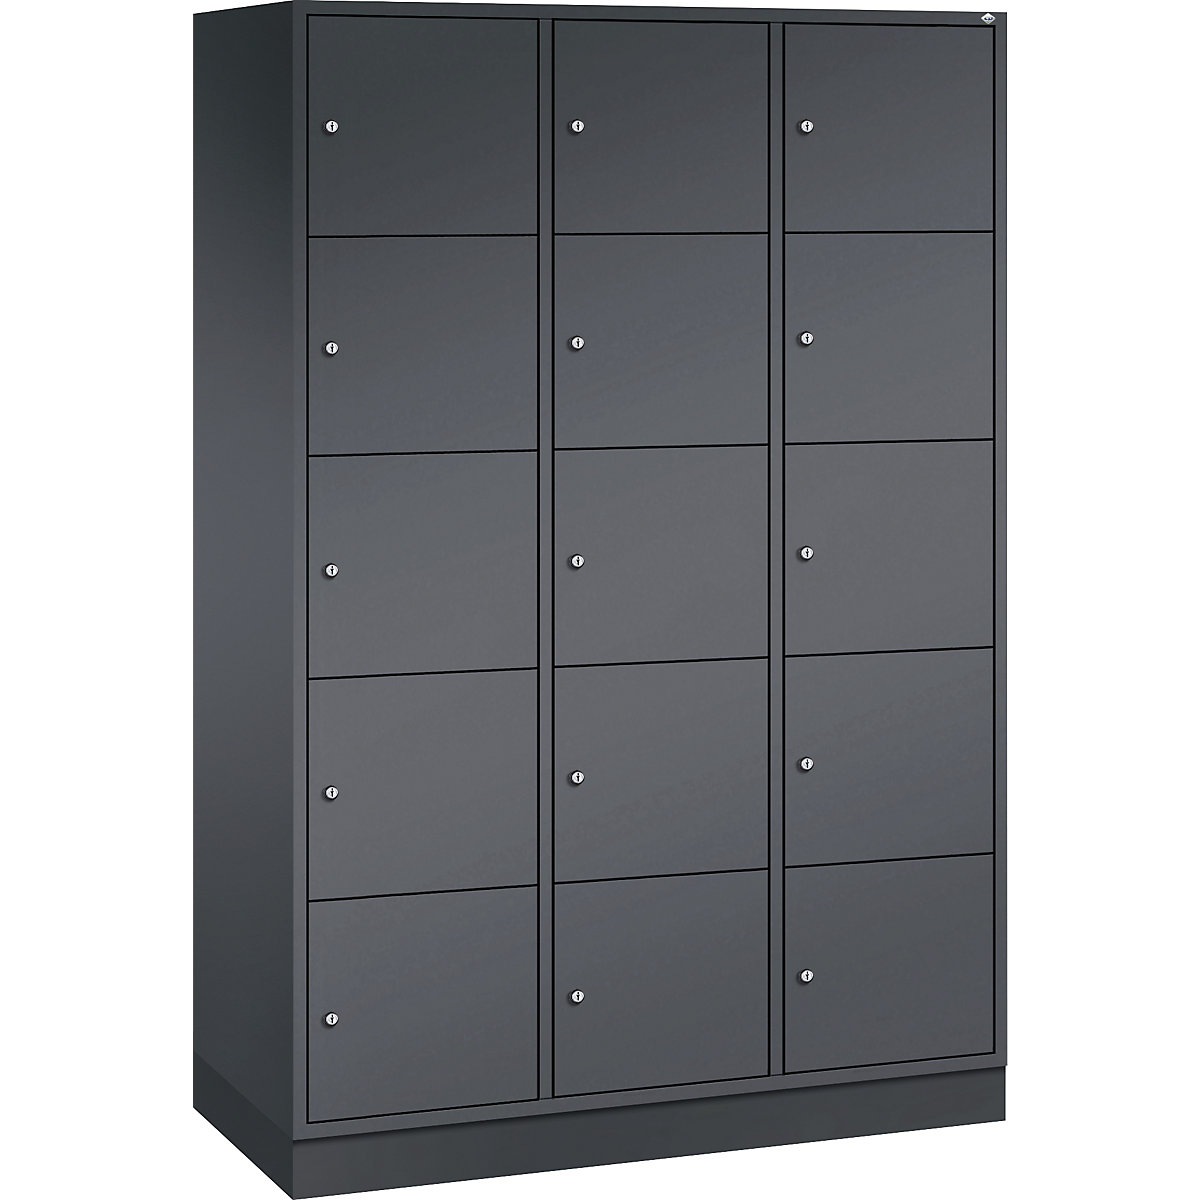 INTRO steel compartment locker, compartment height 345 mm – C+P, WxD 1220 x 500 mm, 15 compartments, black grey body, black grey doors